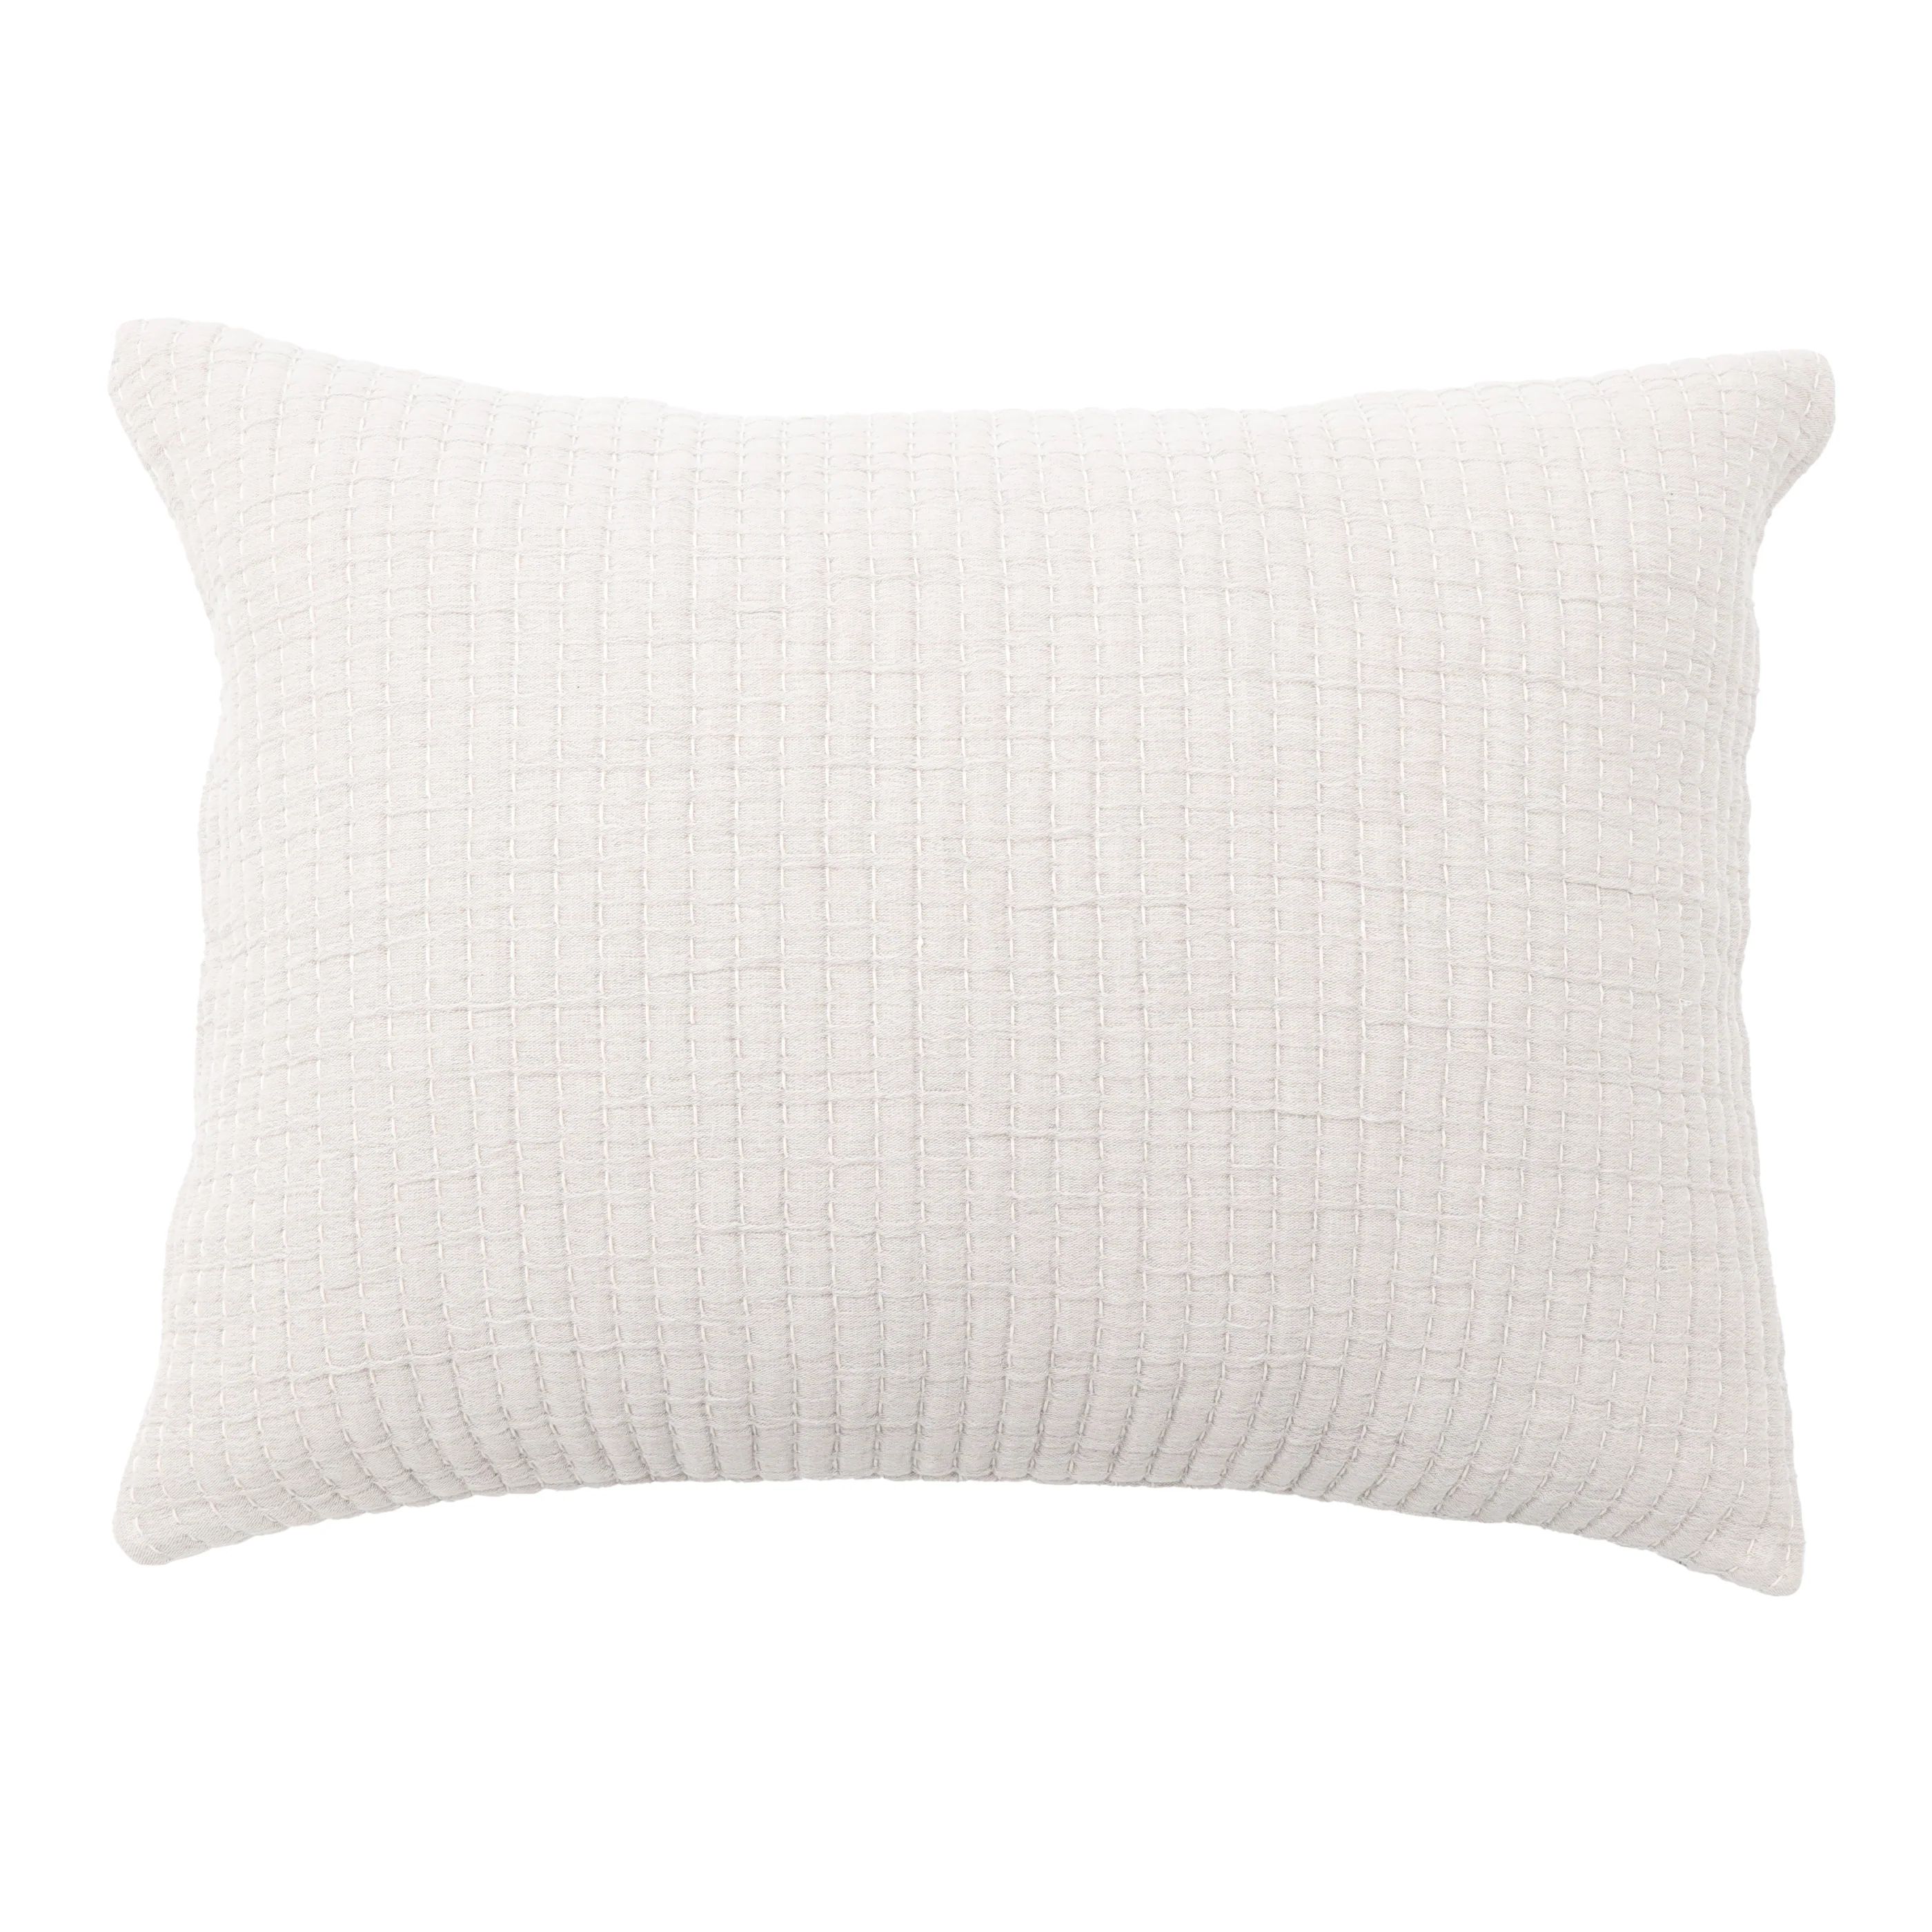 Vancouver Big Pillow With Insert | Pom Pom at Home